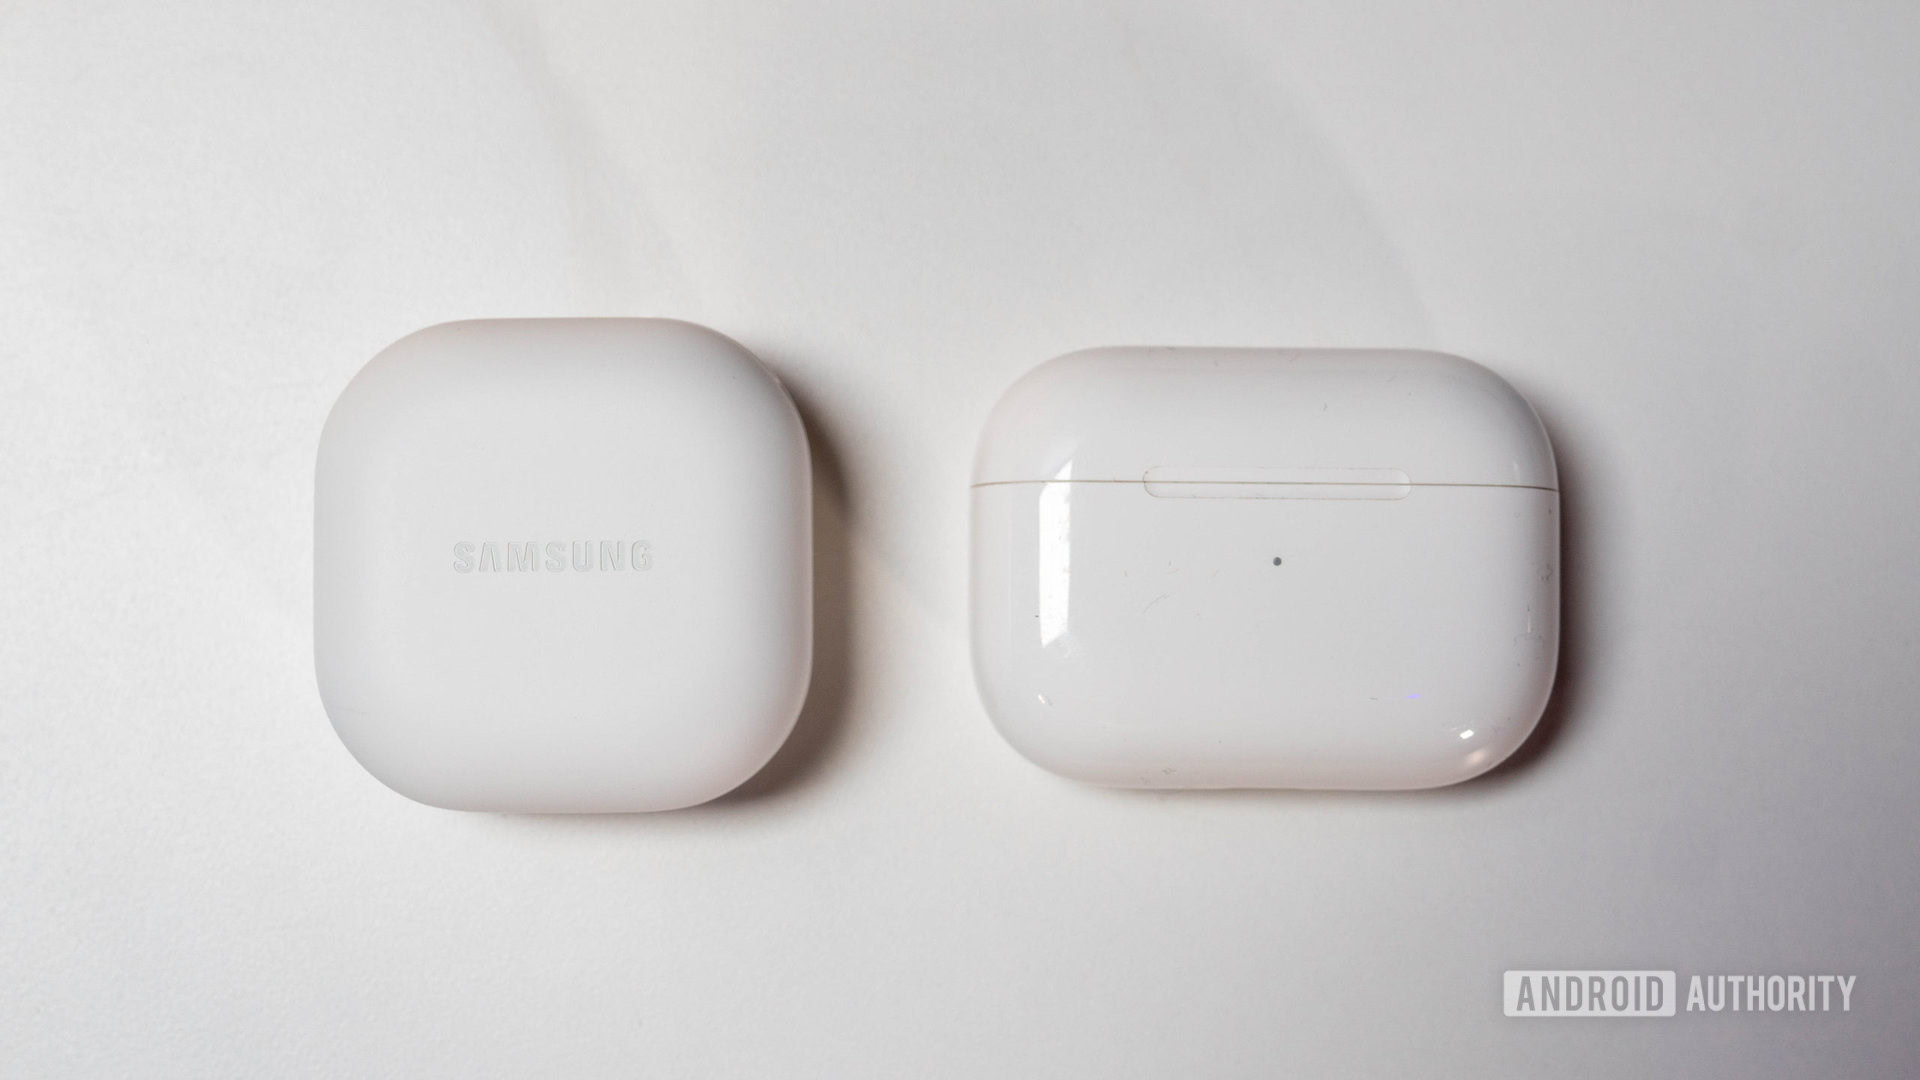 Samsung Galaxy Buds 2 Pro vs Apple AirPods Pro (1st gen): Which should you